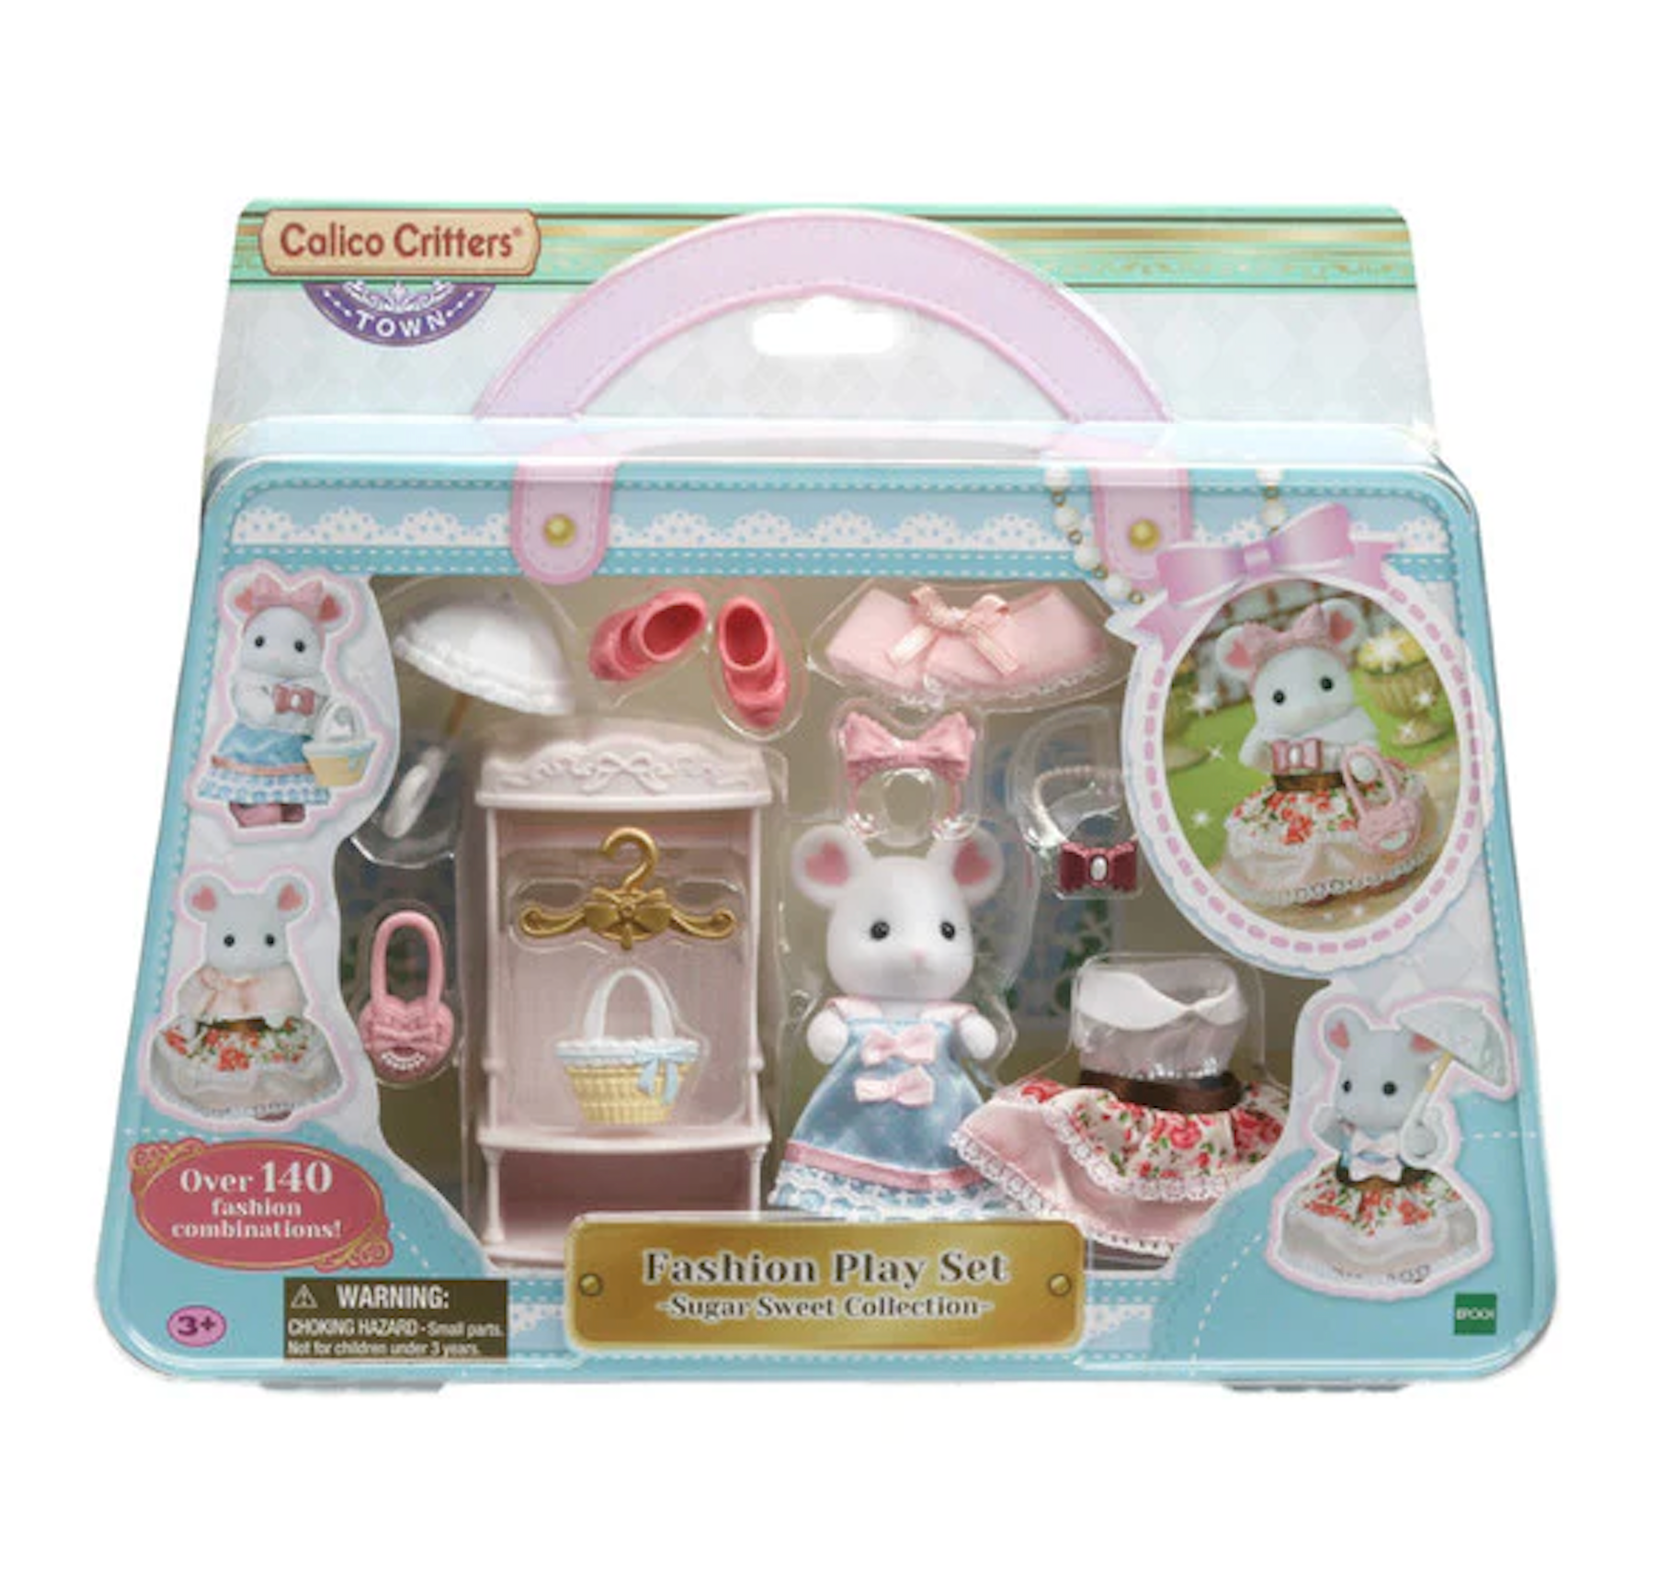 Calico Critters: Fashion Playset Sugar Sweet Collection